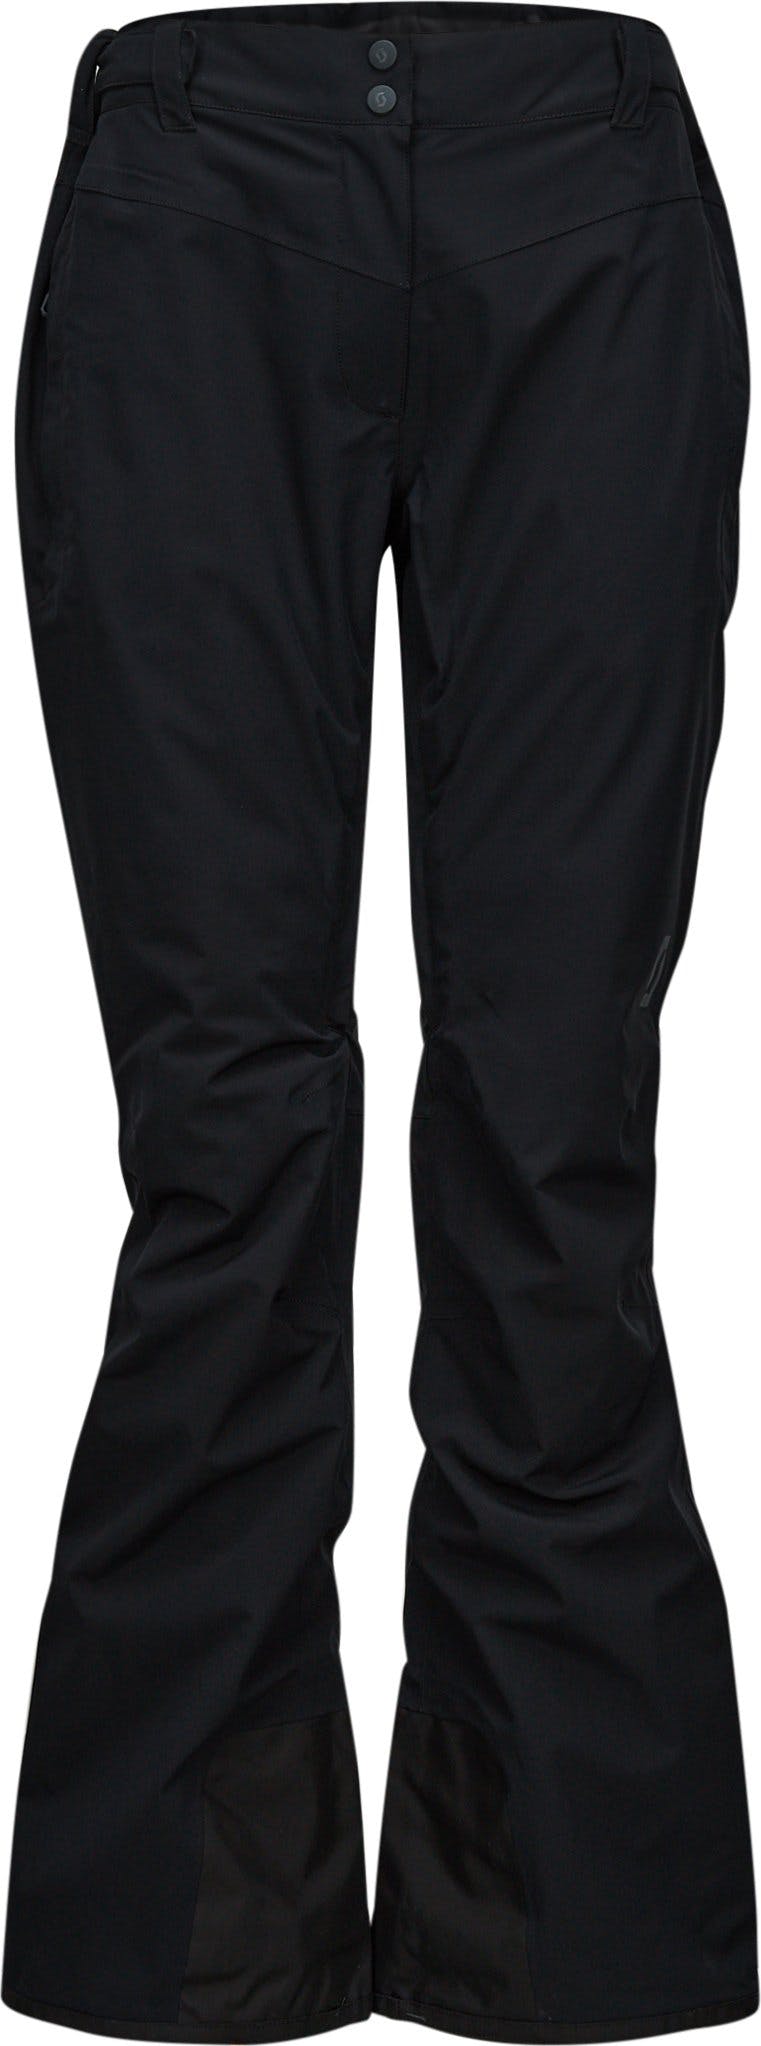 Product image for Ultimate Dryo 10 Pant - Women's